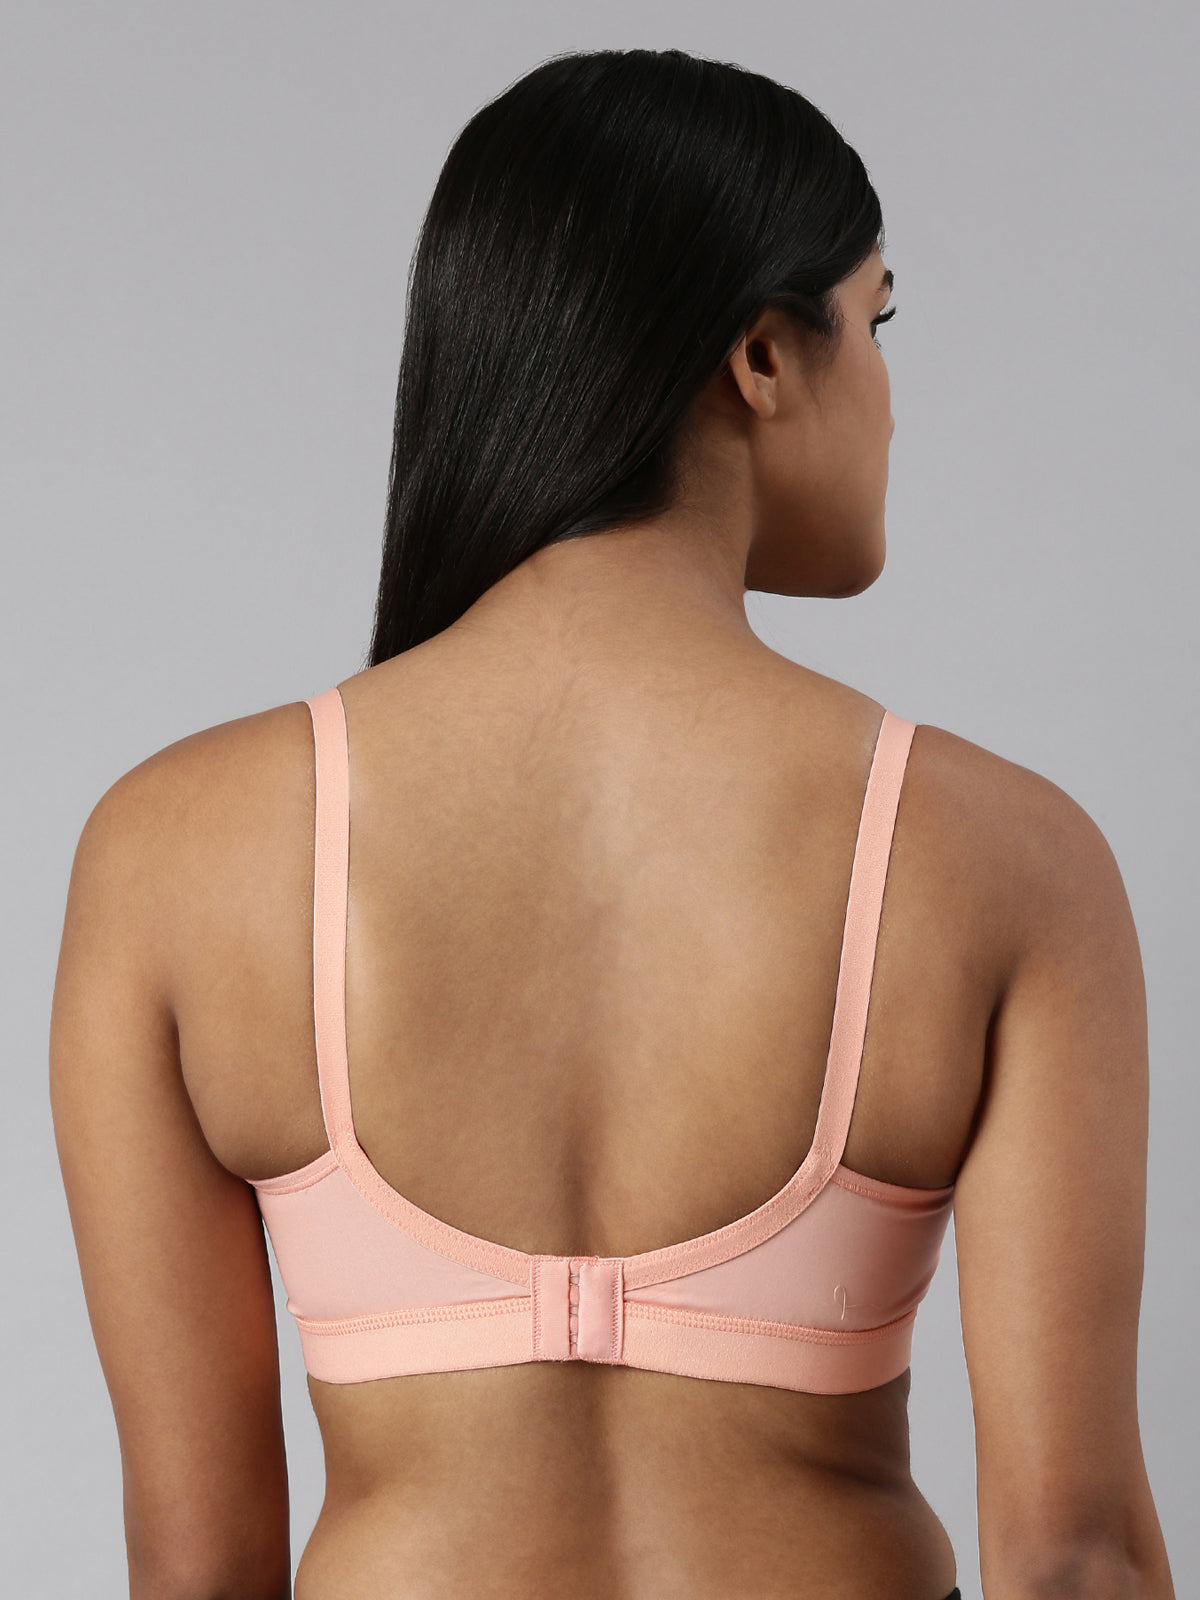 blossom-cotton cross-peach4-Woven knitted-support bra